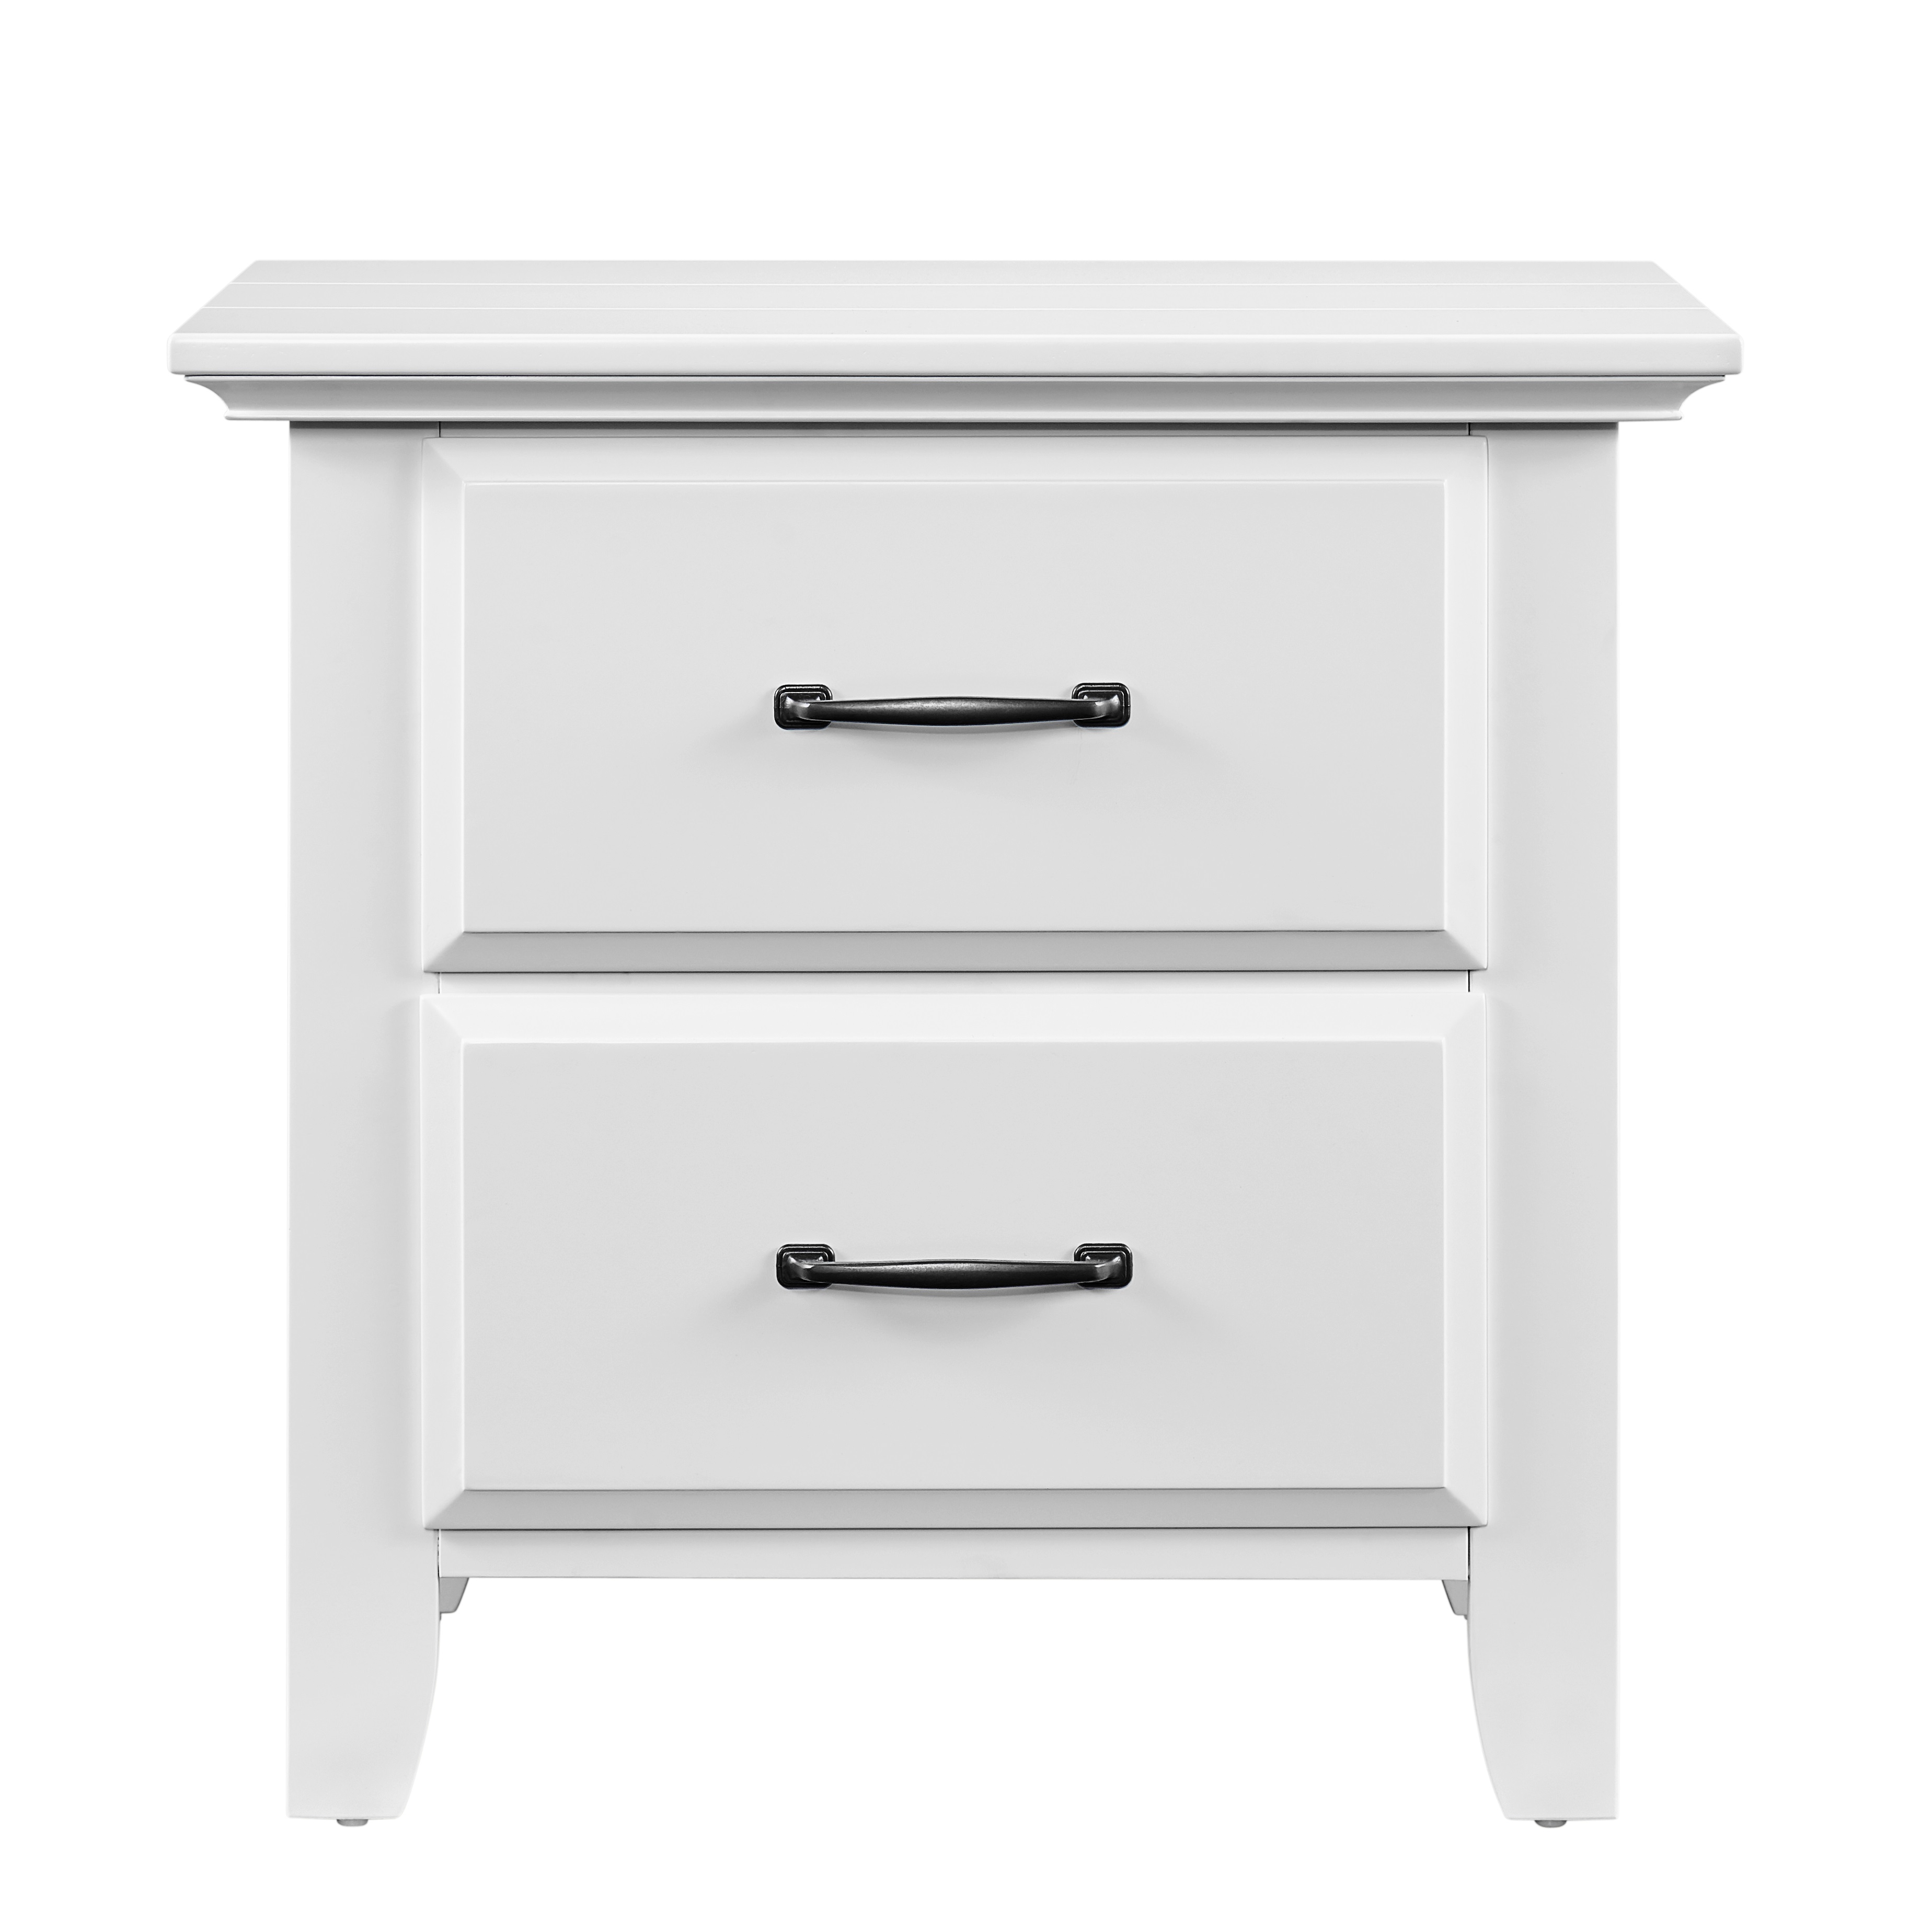 Oxford Baby Willowbrook 2-Drawer Nightstand, White - image 3 of 5